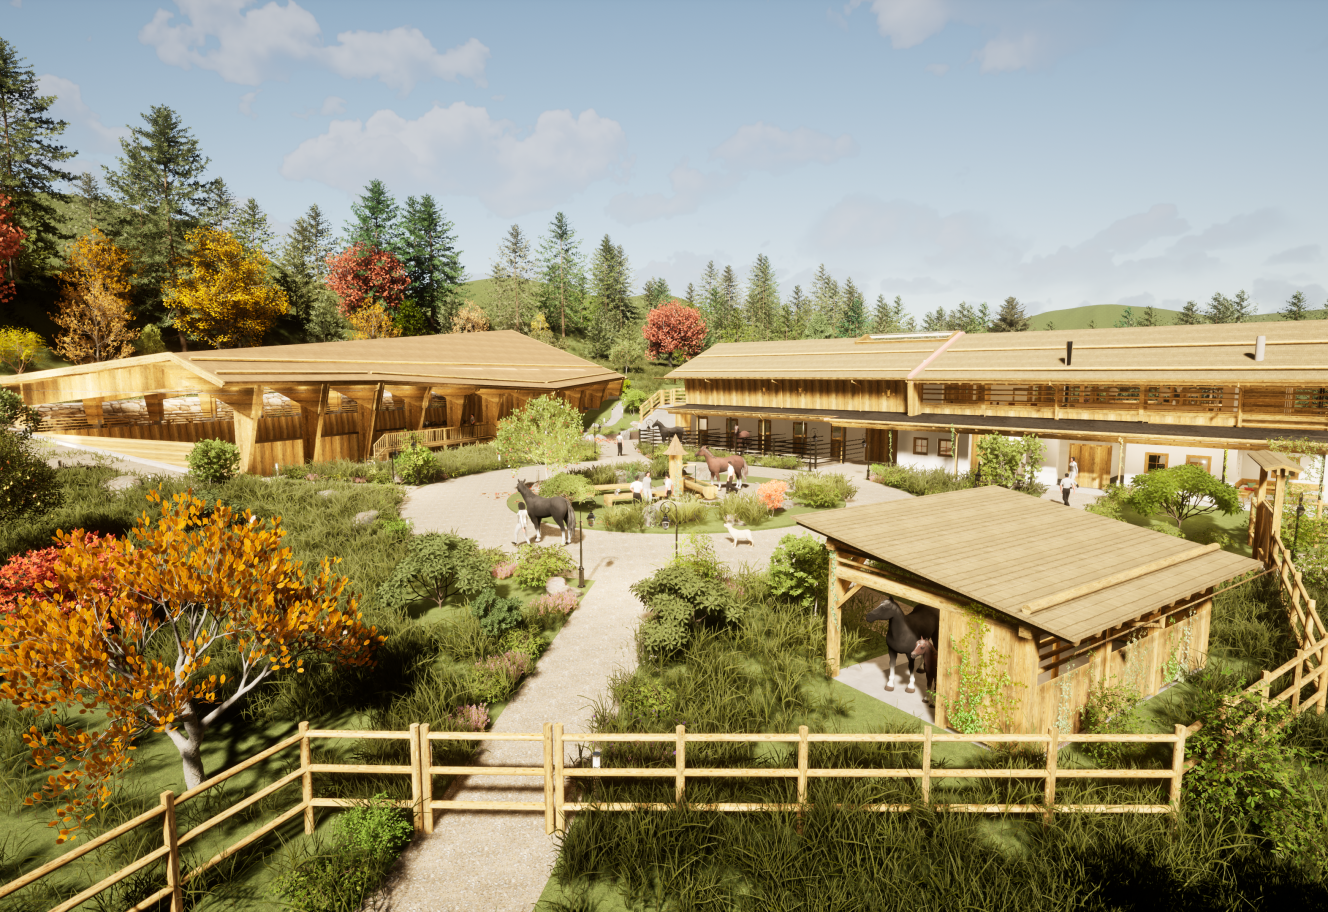 NEW IN 2022: RIDING STABLES  - Naturhotel Forsthofgut